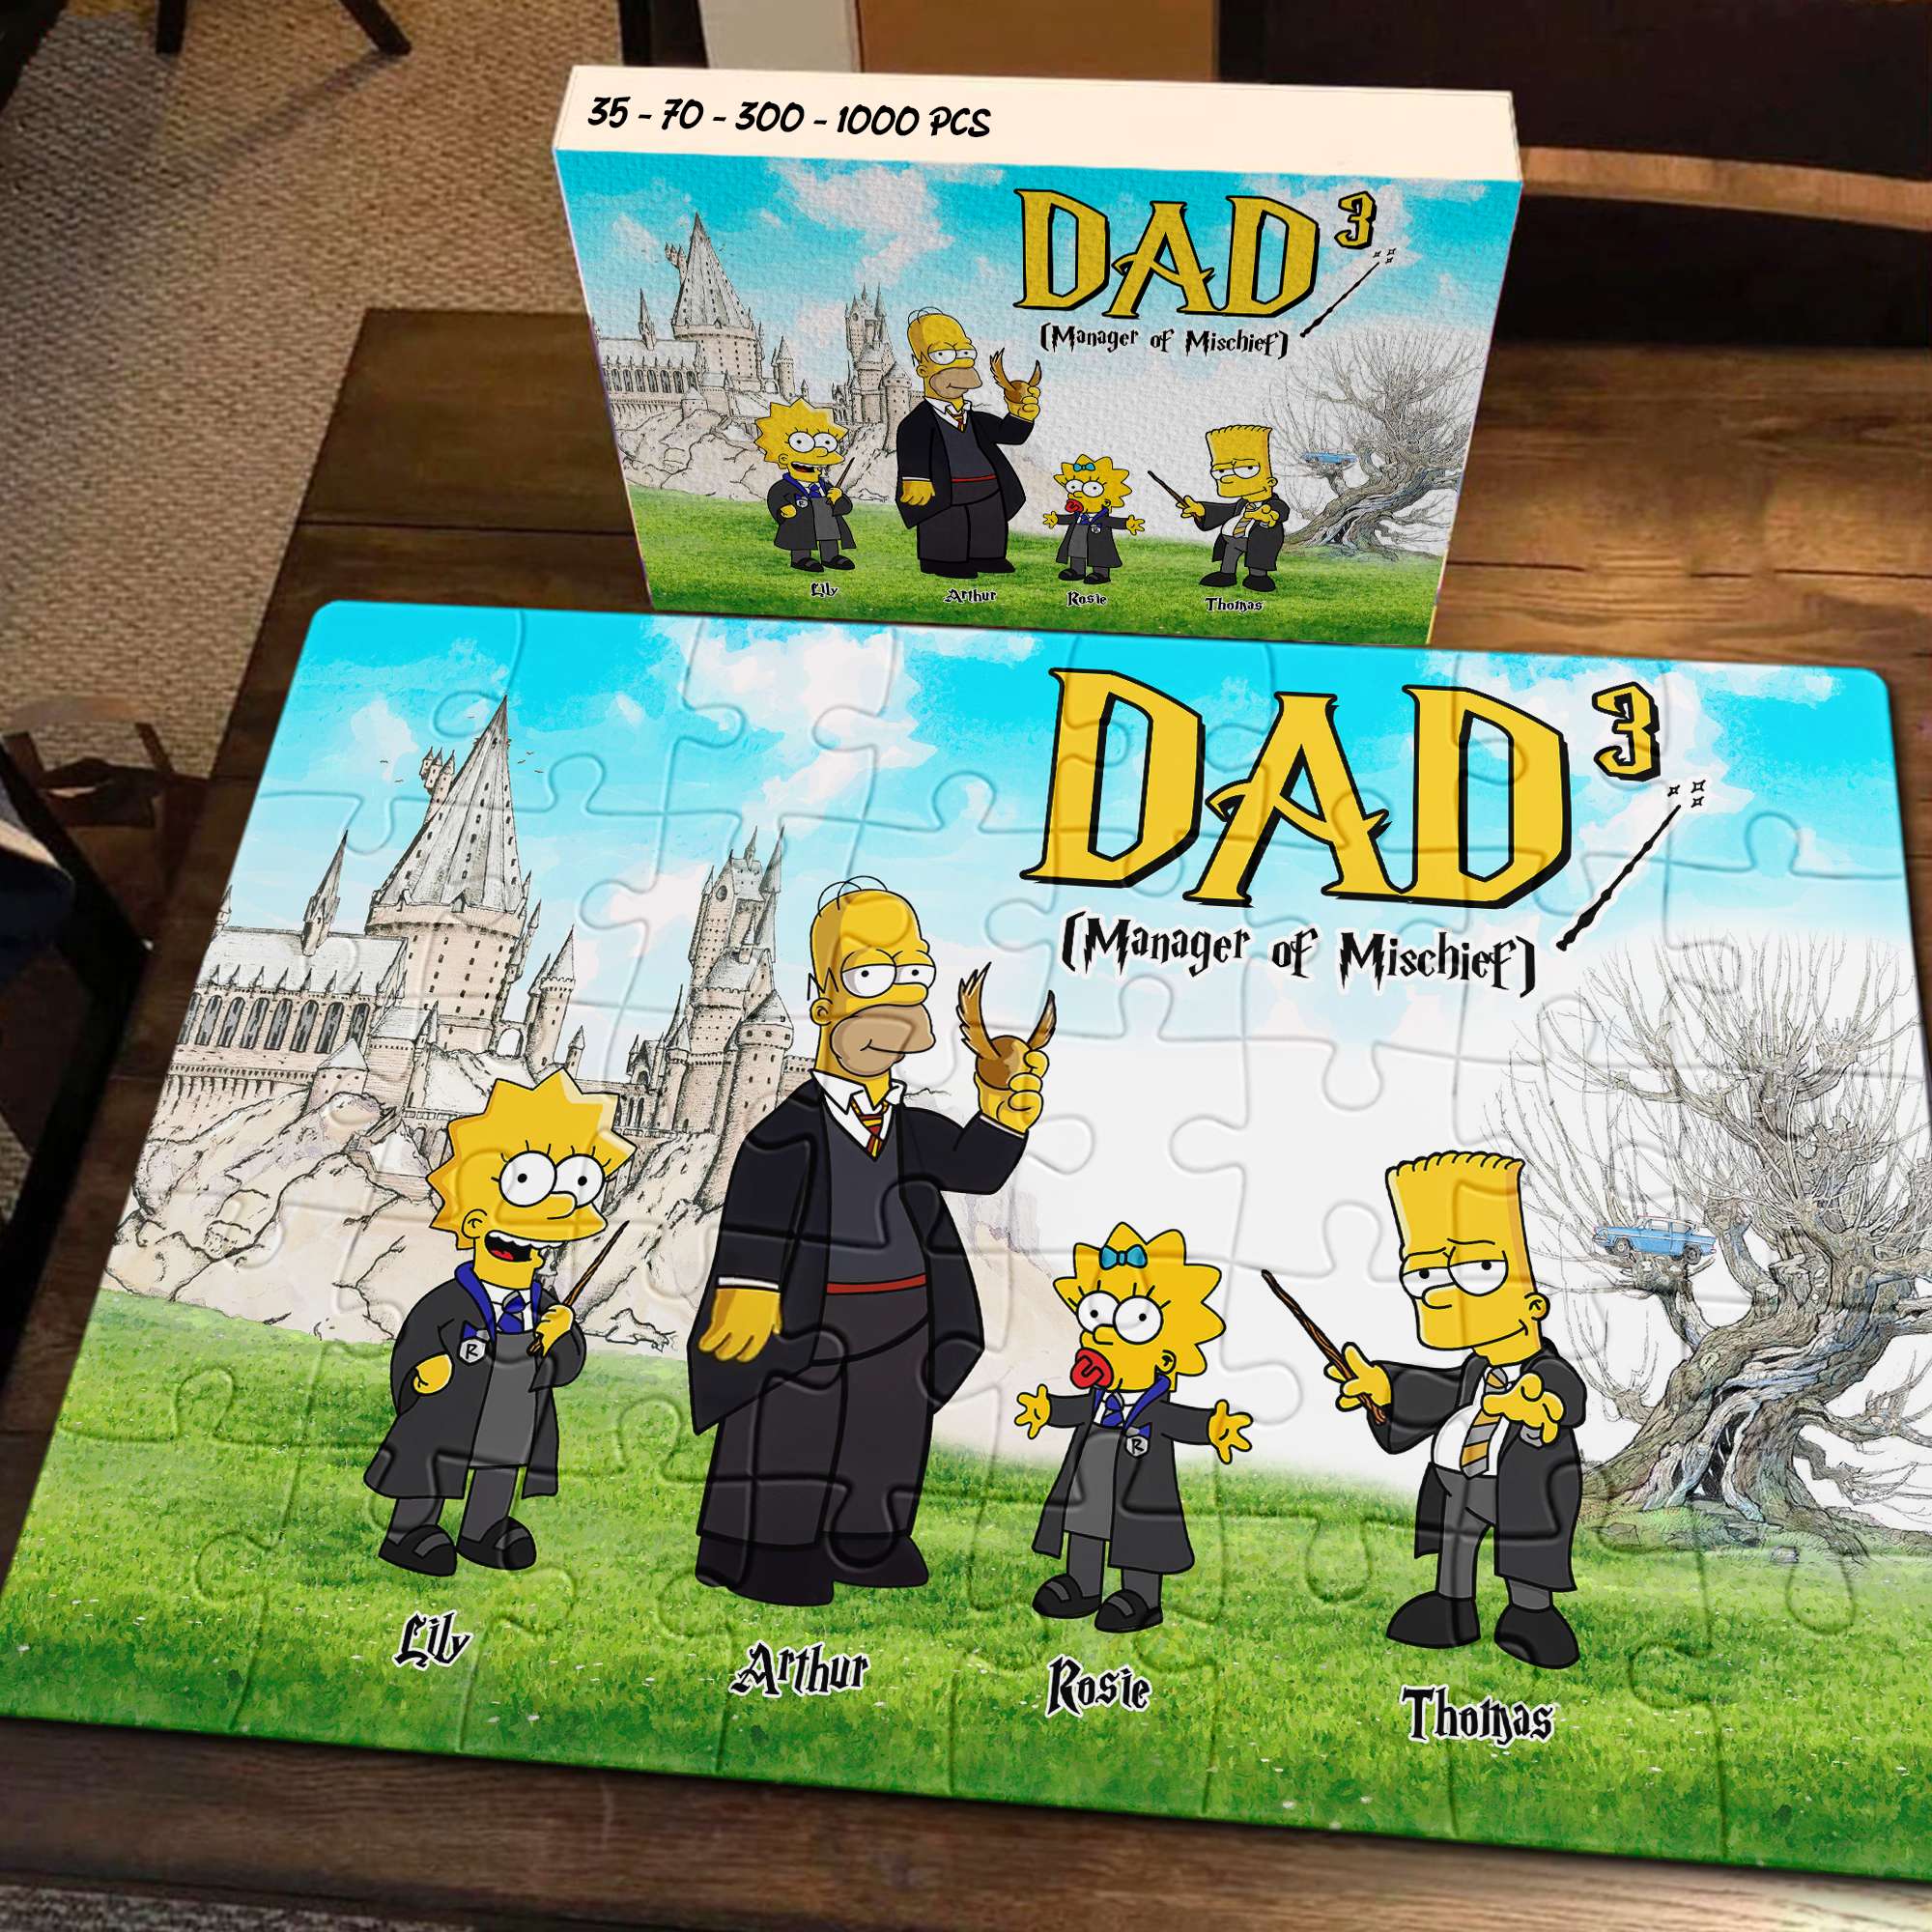 Personalized Gifts For Dad Jigsaw Puzzle 01huhu180524-Homacus